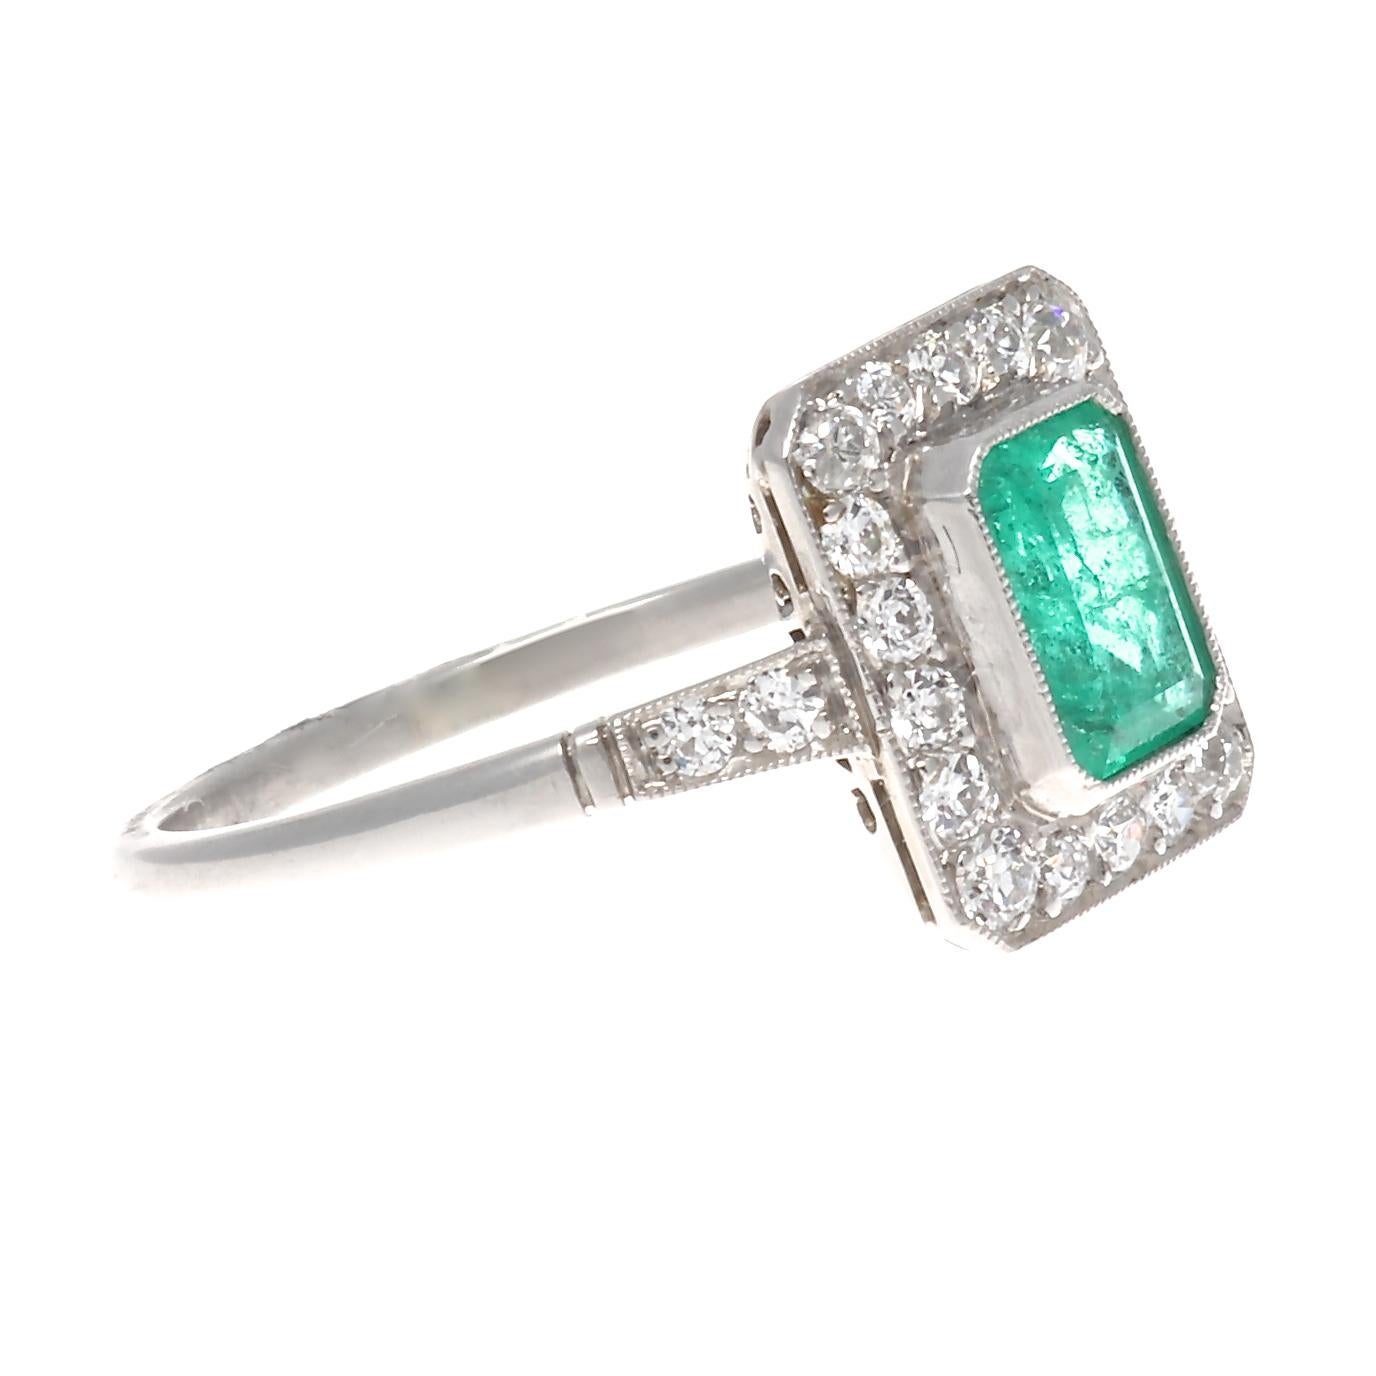 Inspired by the finest era of jewelry. Art Deco is a style of visual arts combining architecture and design that first originated in France before the commencement of the first world war. Featuring a 0.64 carat forest green emerald that is perfectly